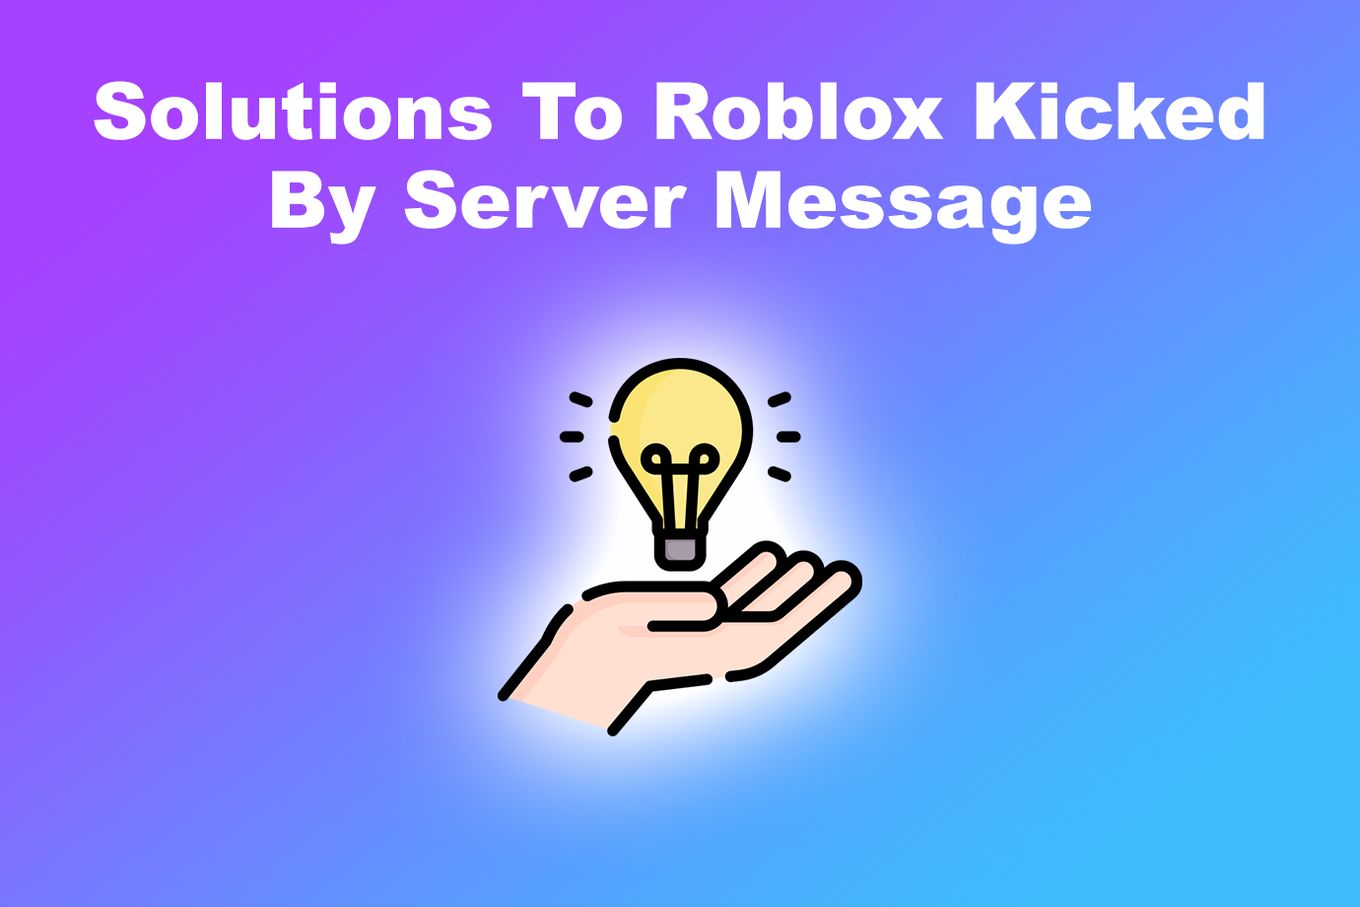 Solutions To 'Roblox Kicked By Server' Message